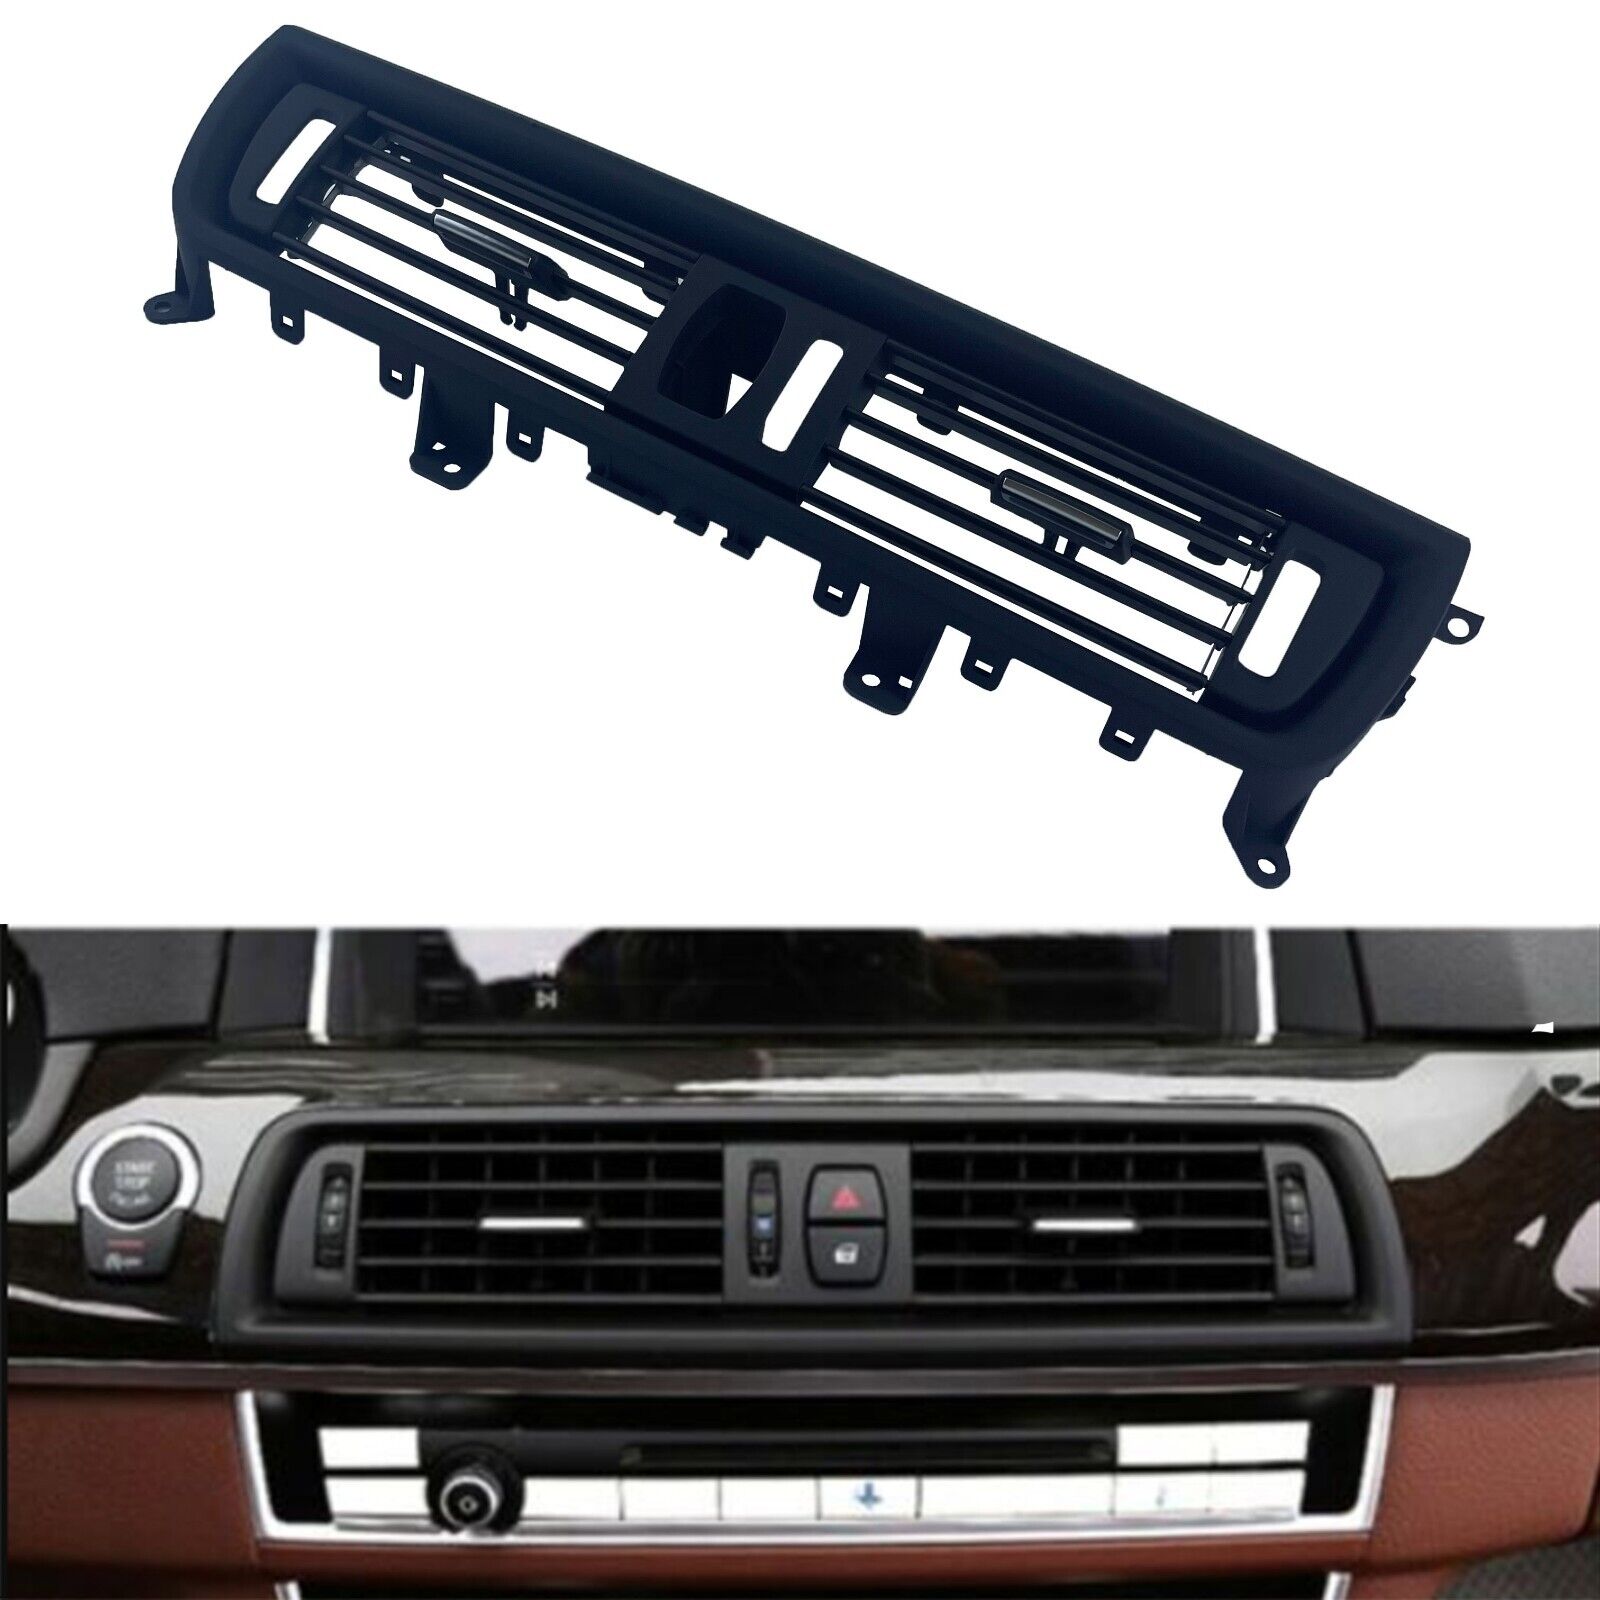 Front Air Grille Center Dash AC Vent Fits For BMW F10 F11 F18 5 Series 550i 535i